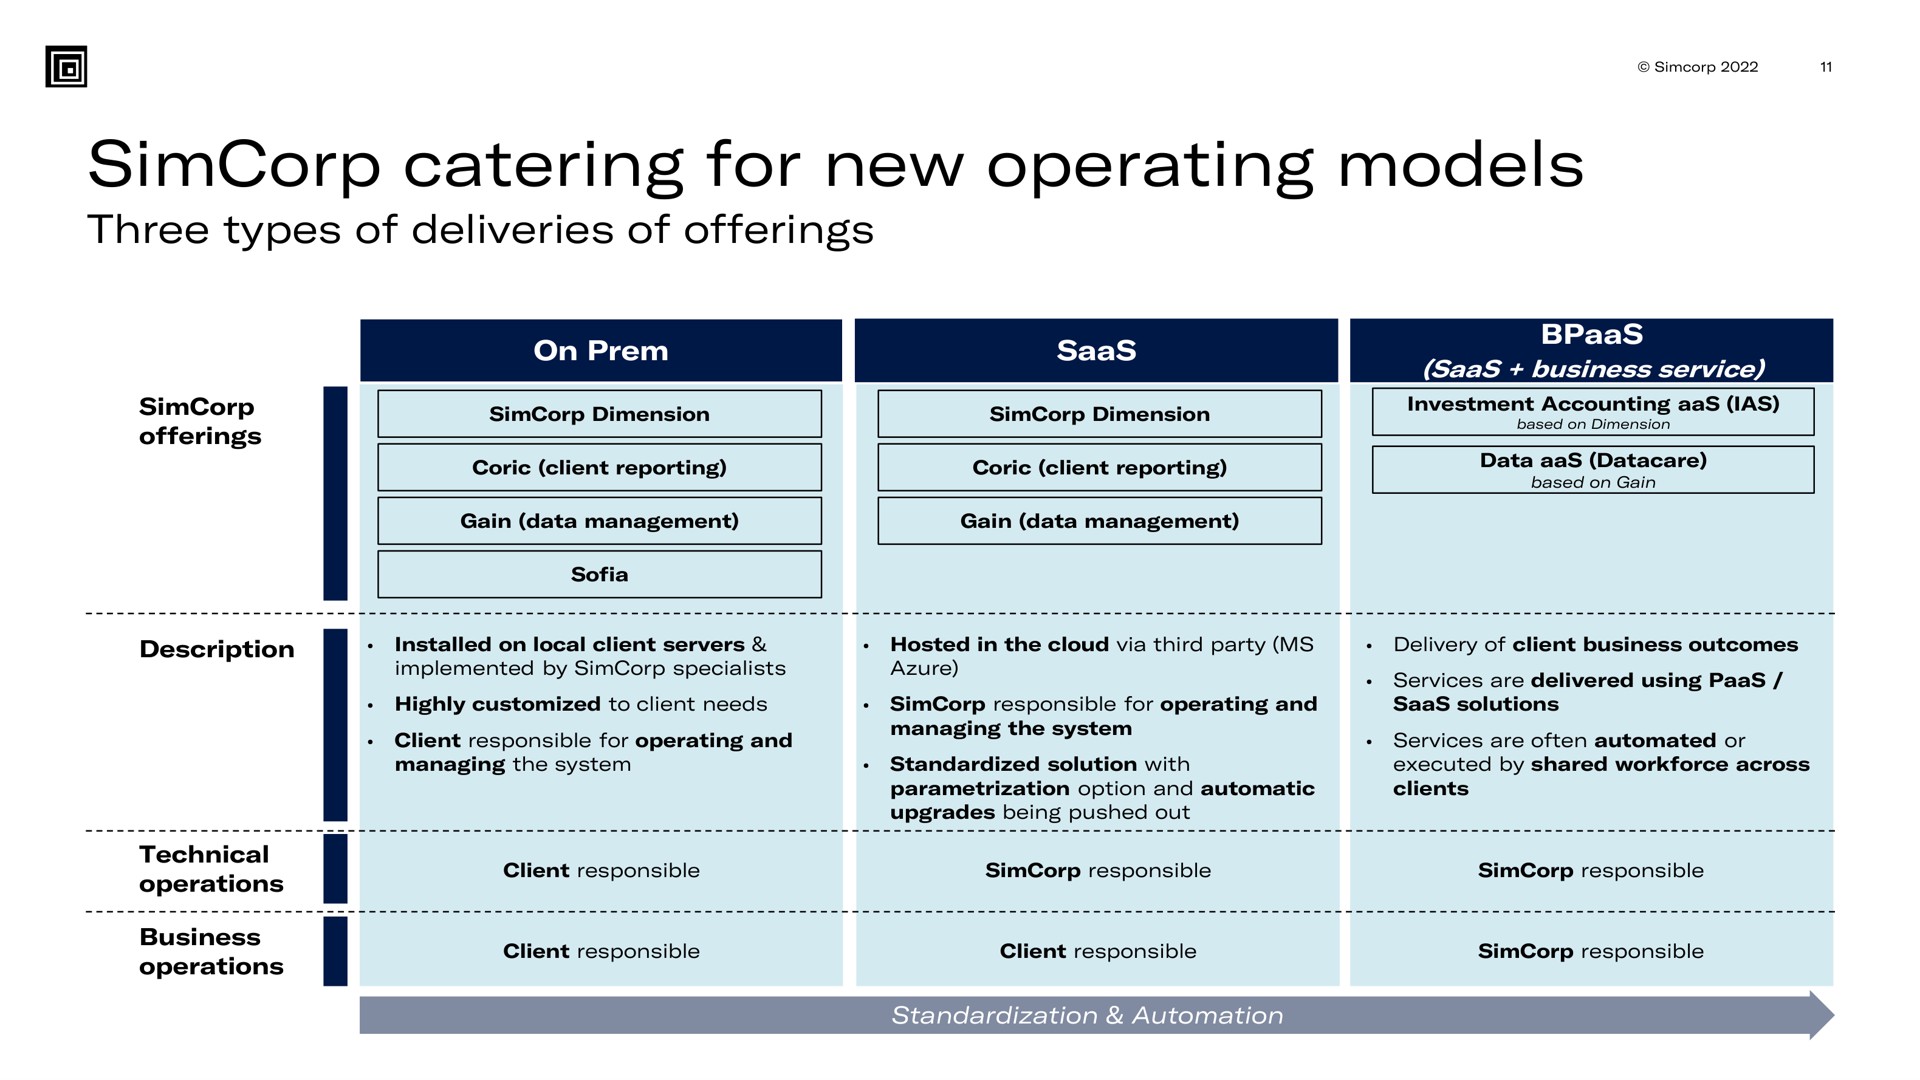 catering for new operating models | SimCorp